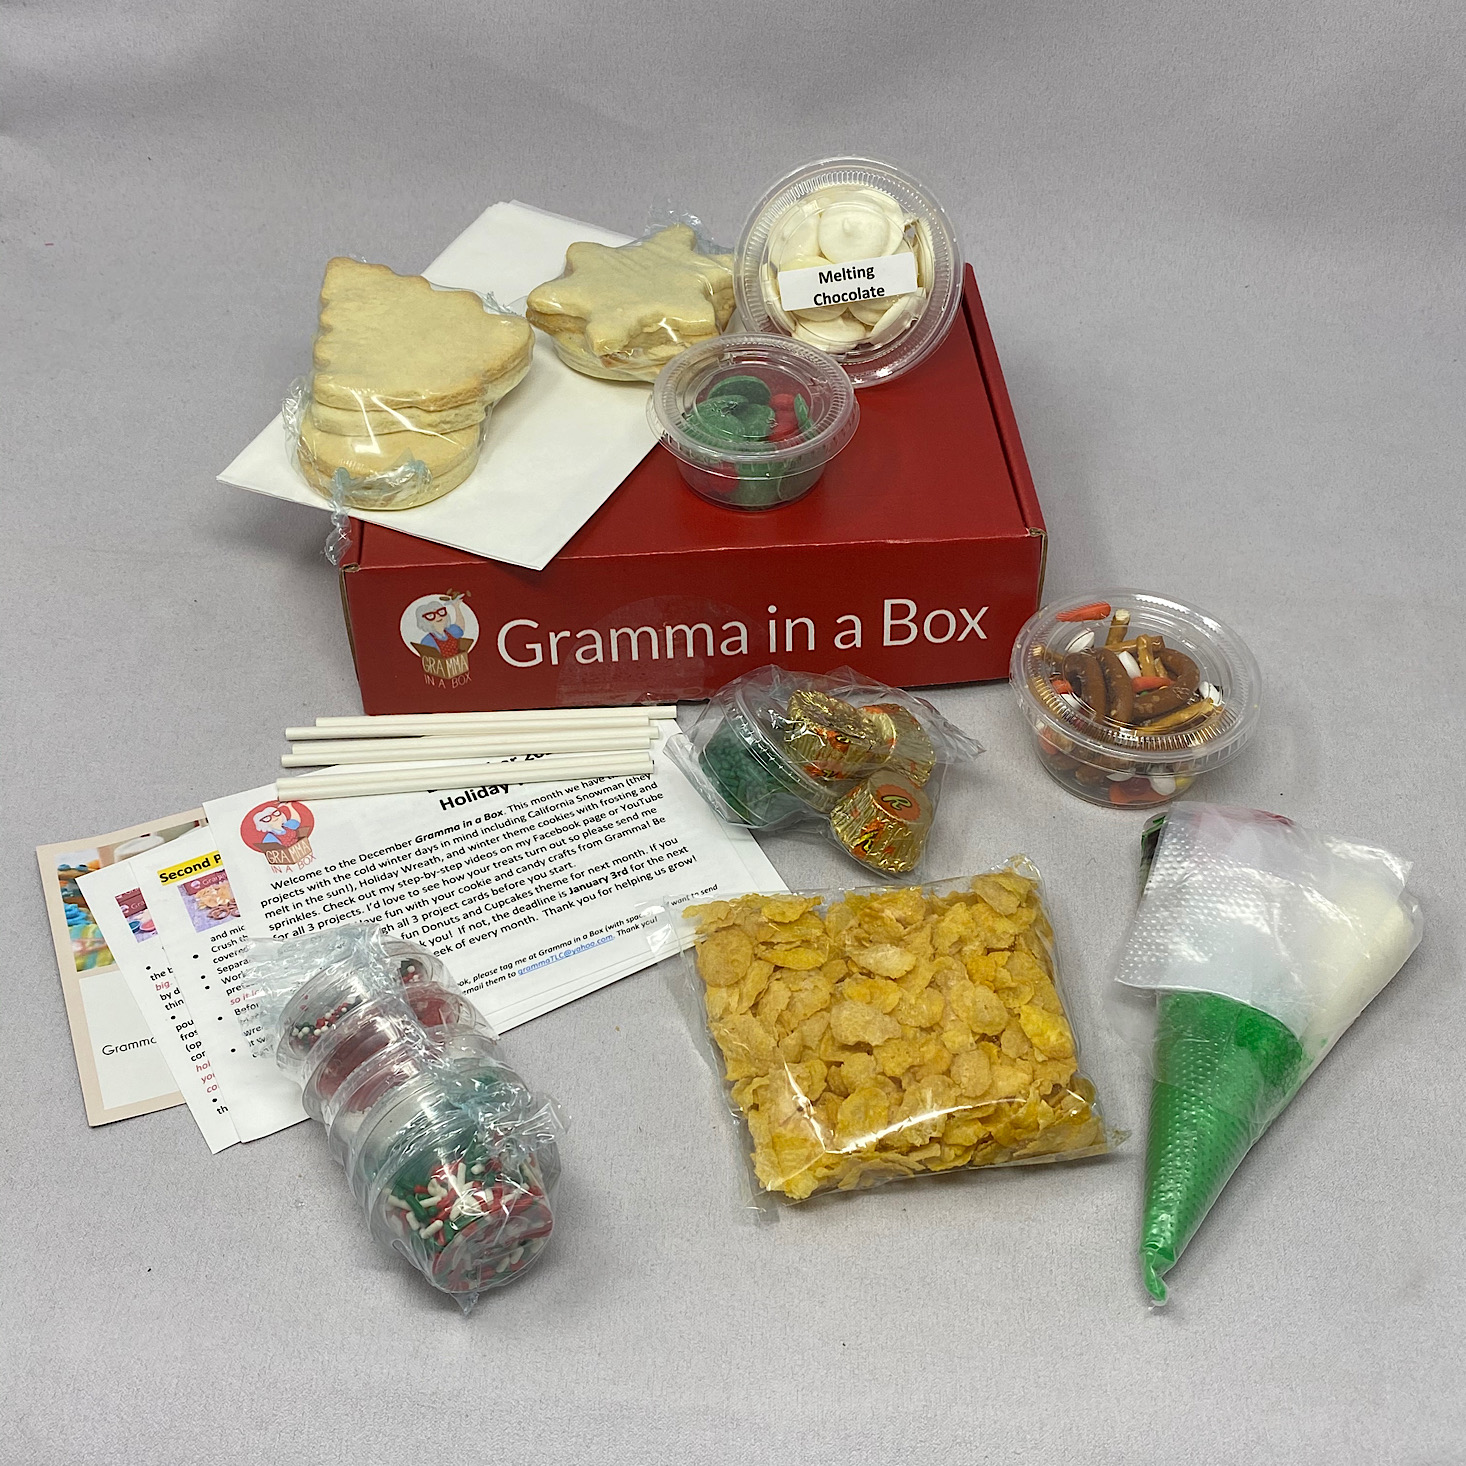 Gramma in a Box “Holiday Treats” Review  – December 2020